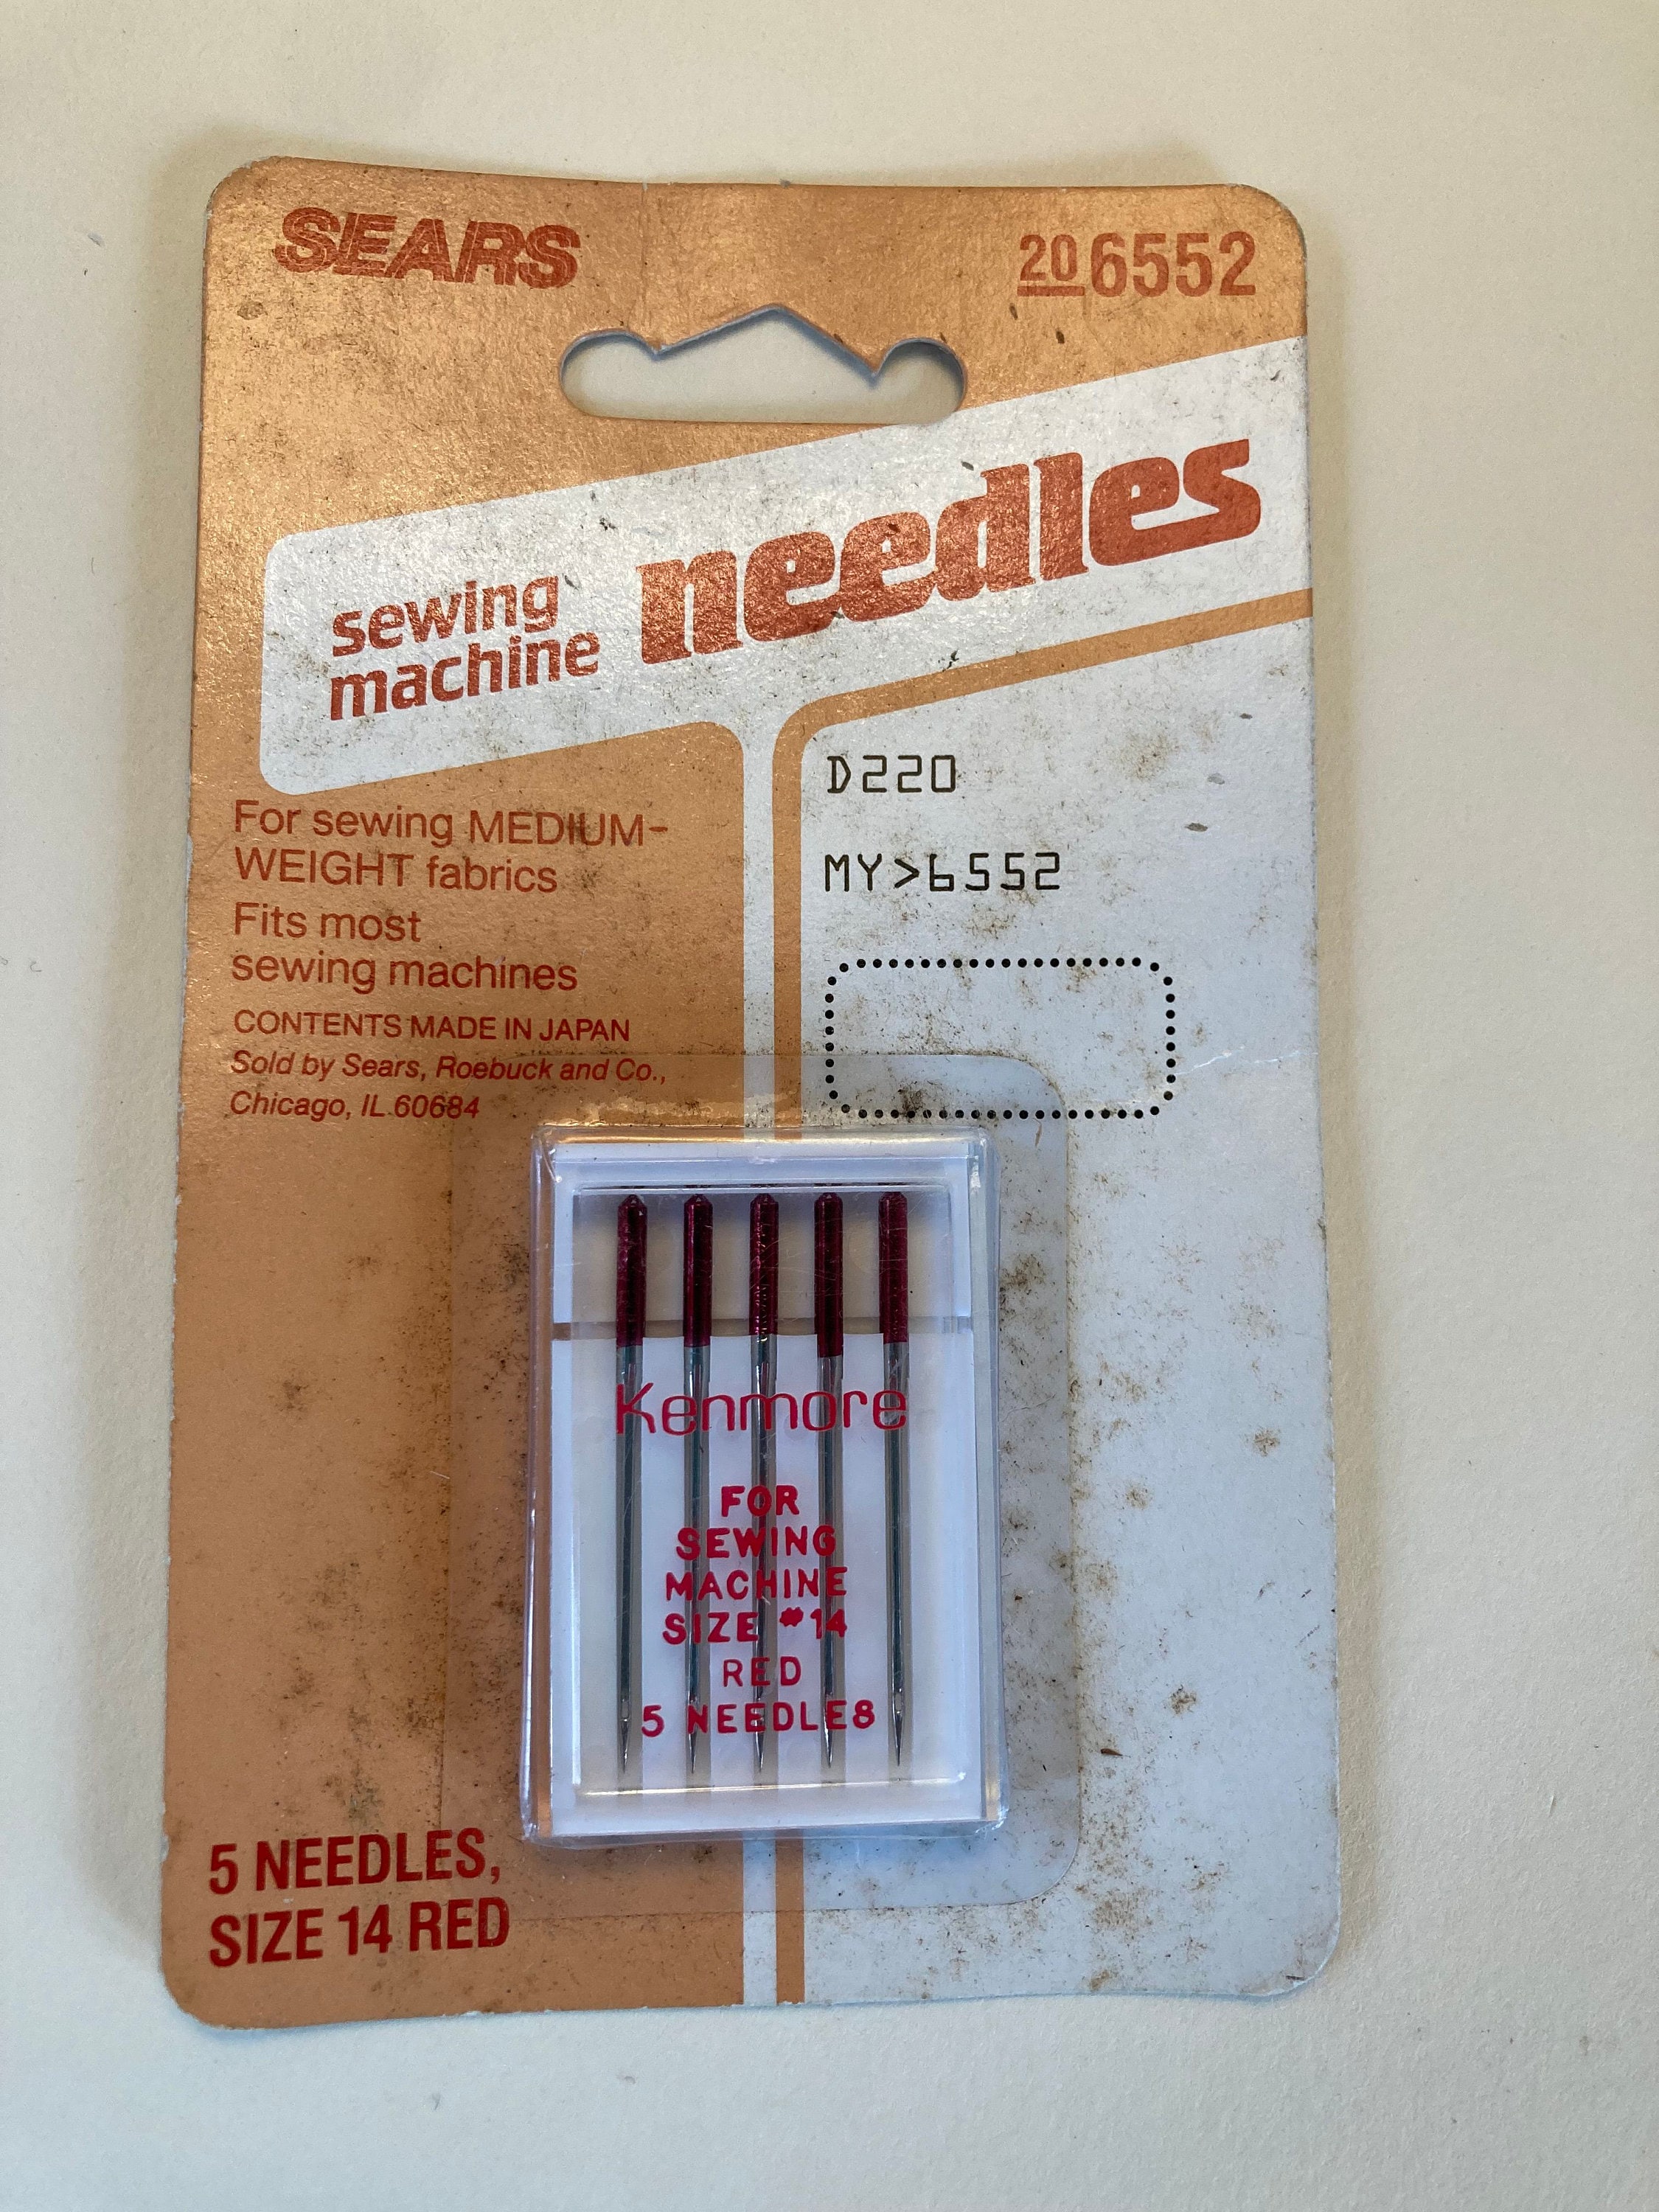 I needed Kenmore 6021 needles for the 1961 sewing machine I just